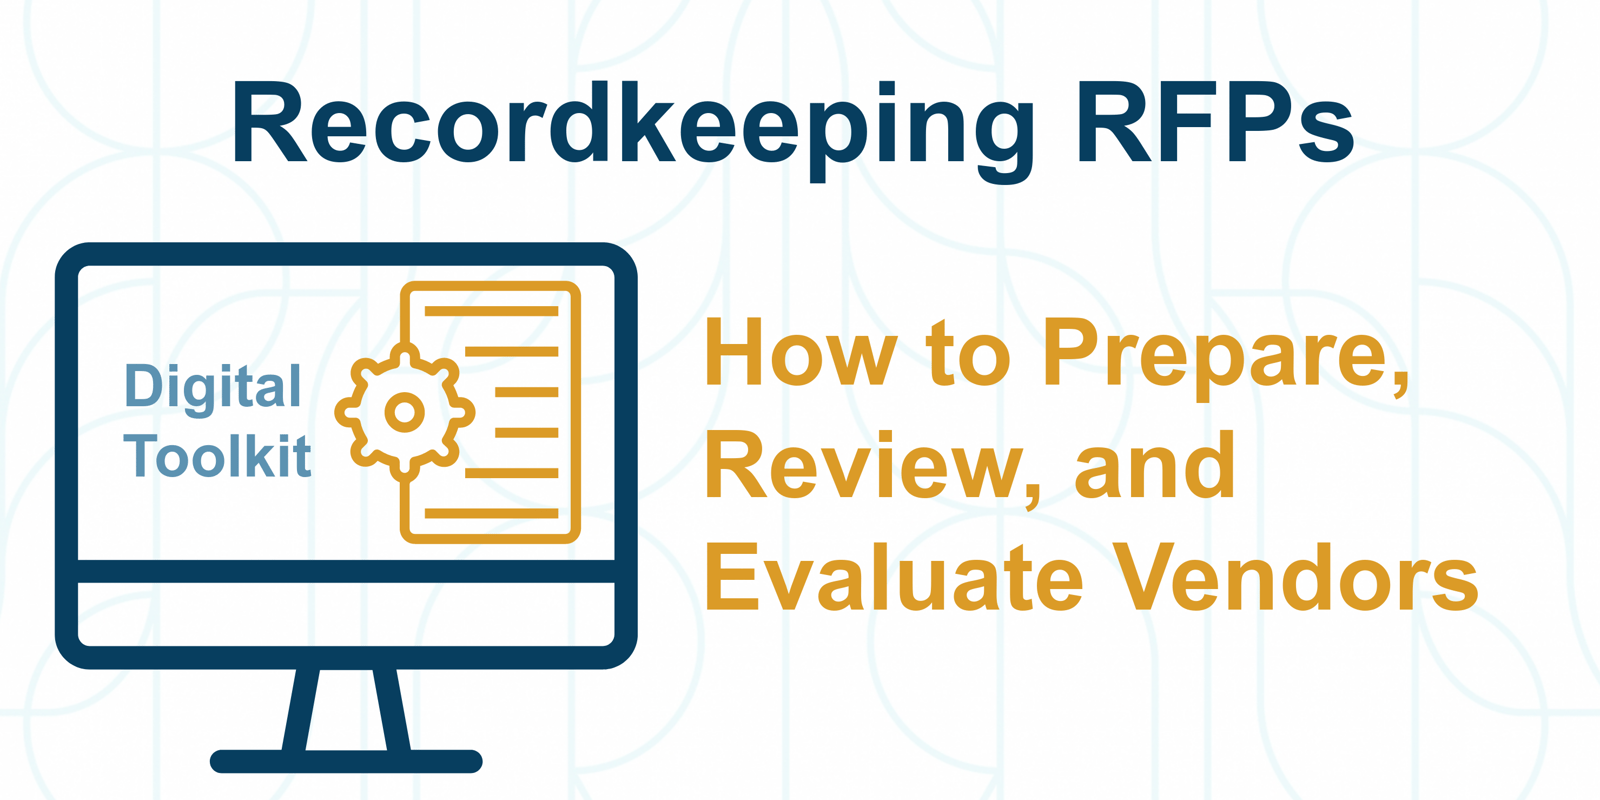 Recordkeeping RFPs: How to Prepare, Review and Evaluate Vendors